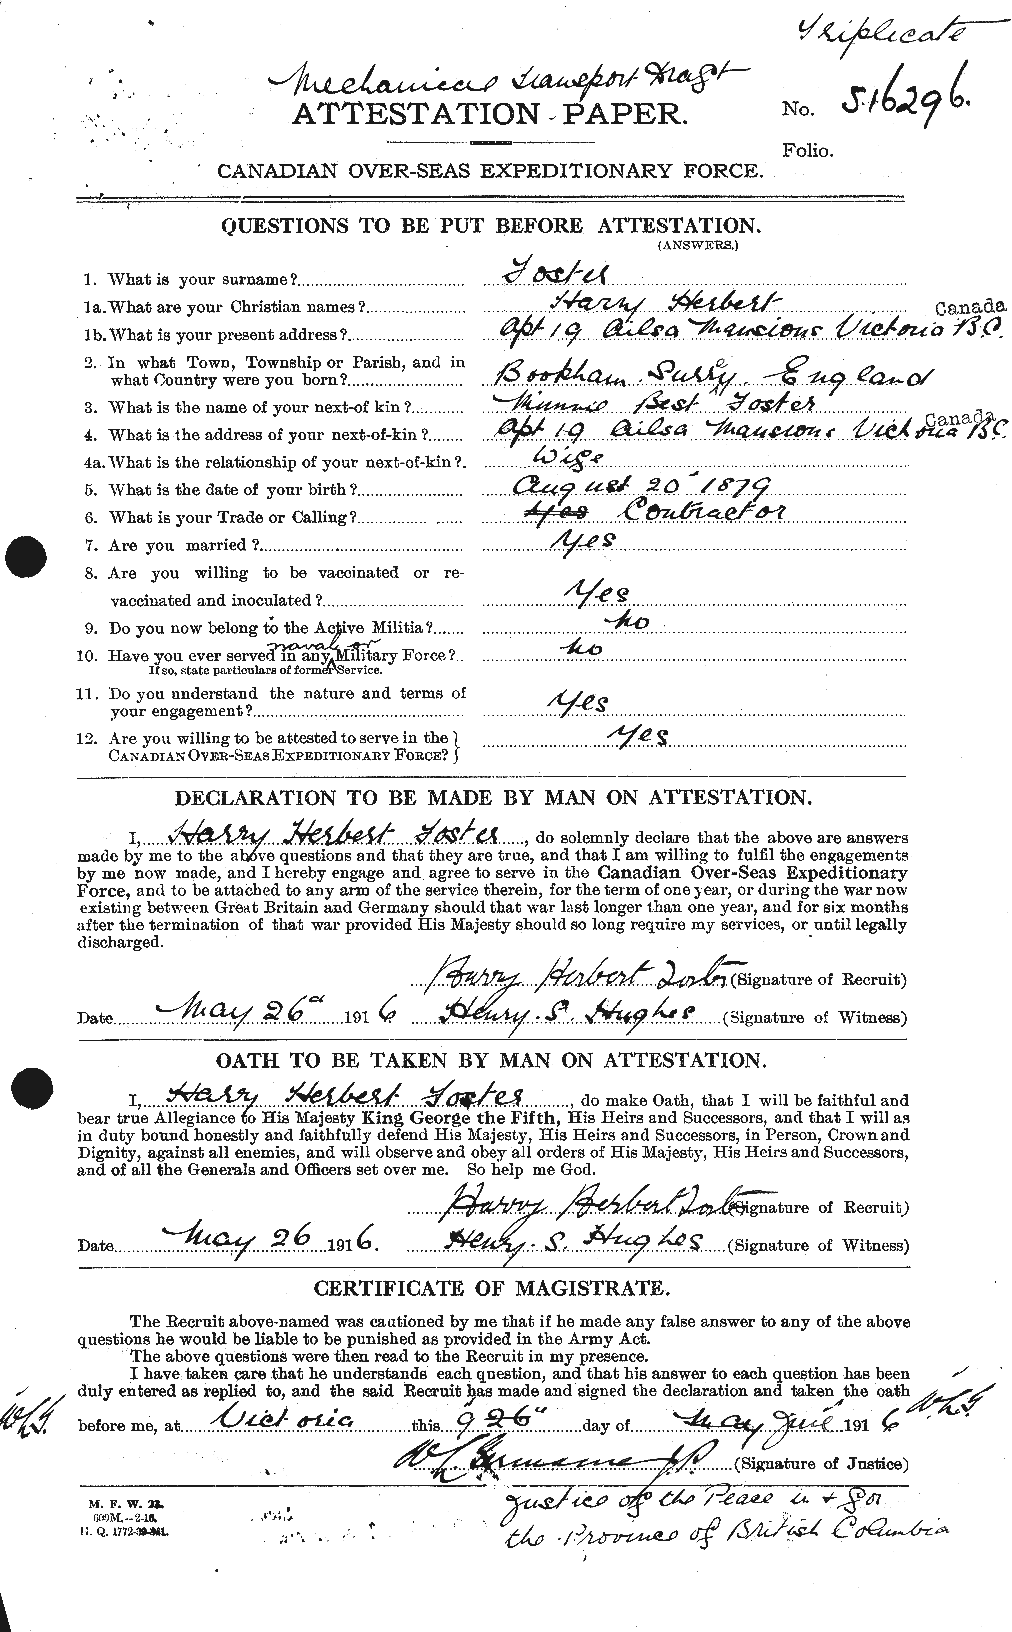 Personnel Records of the First World War - CEF 330751a